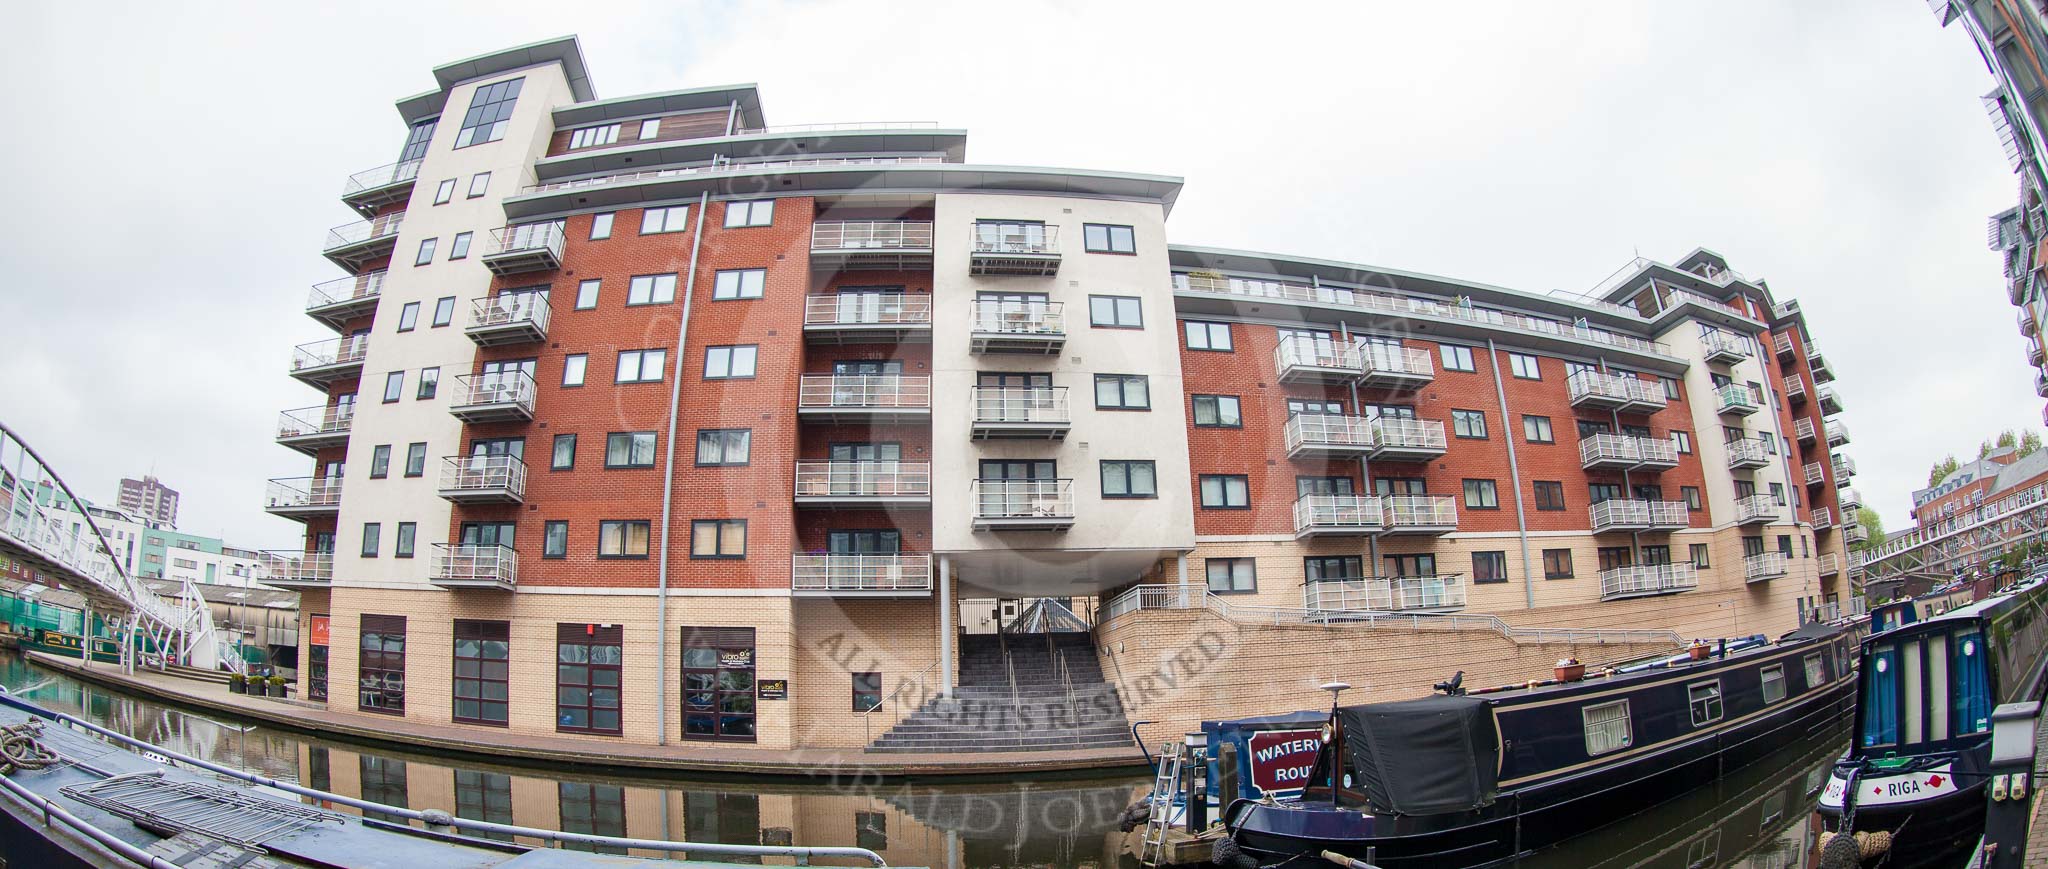 BCN Marathon Challenge 2013: A modern building at Sherborne Wharf, Oozells Street Loop, in the centre of Birmingham..
Birmingham Canal Navigation,


United Kingdom,
on 25 May 2013 at 07:20, image #11